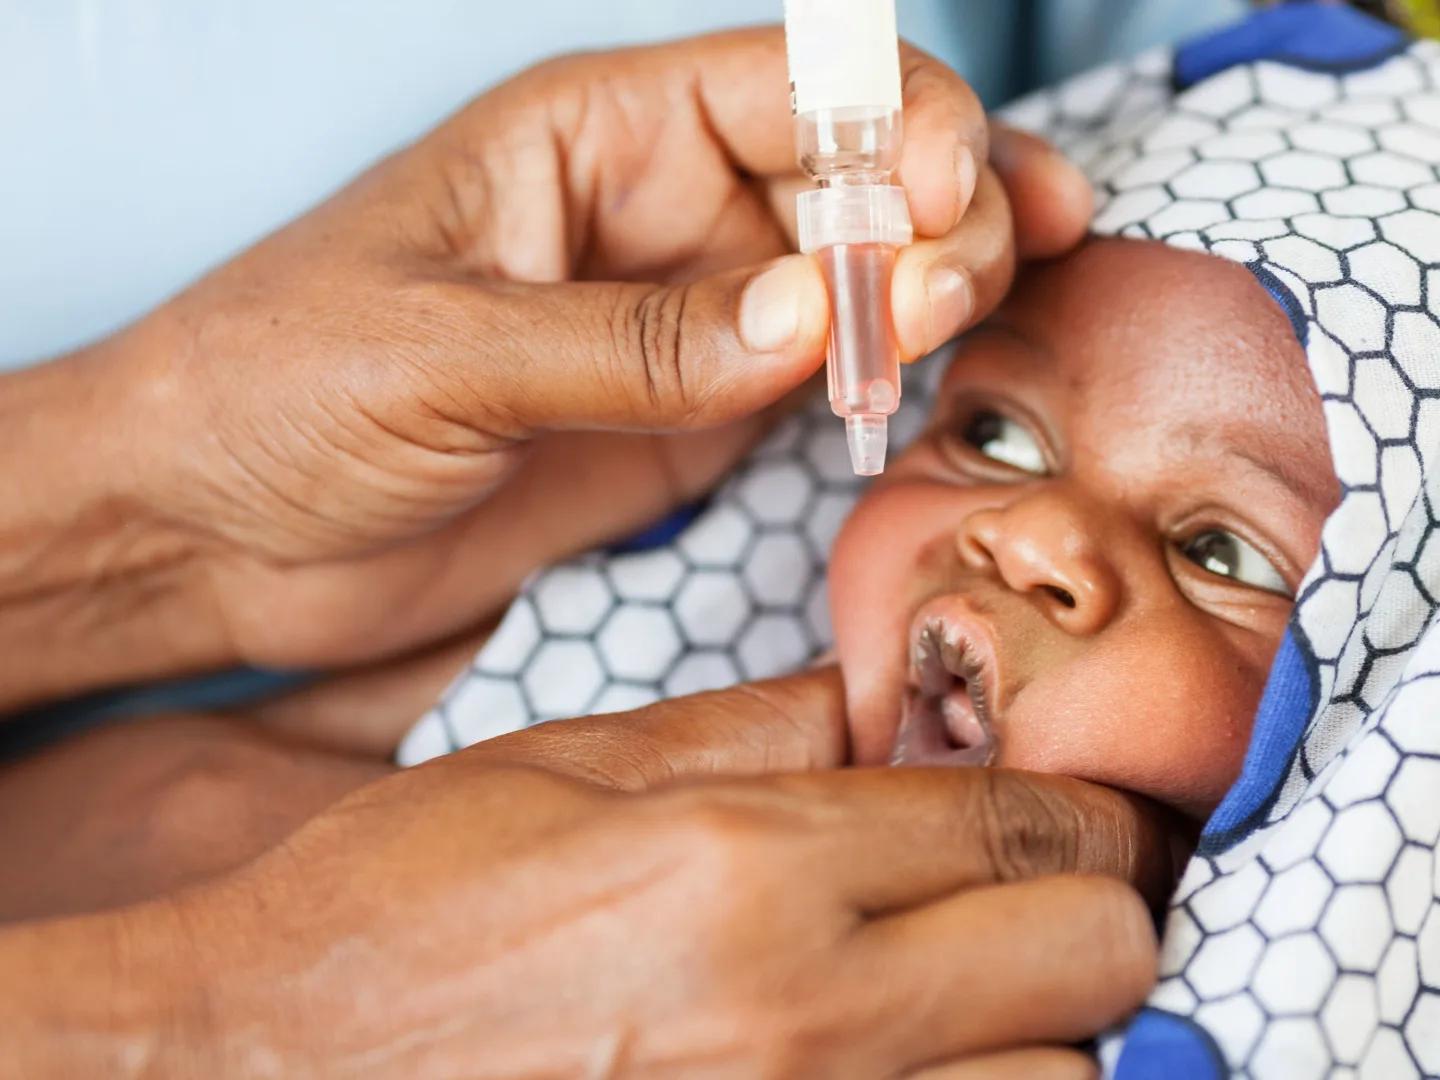 Vaccine-induced polio: More from vaccines than from nature